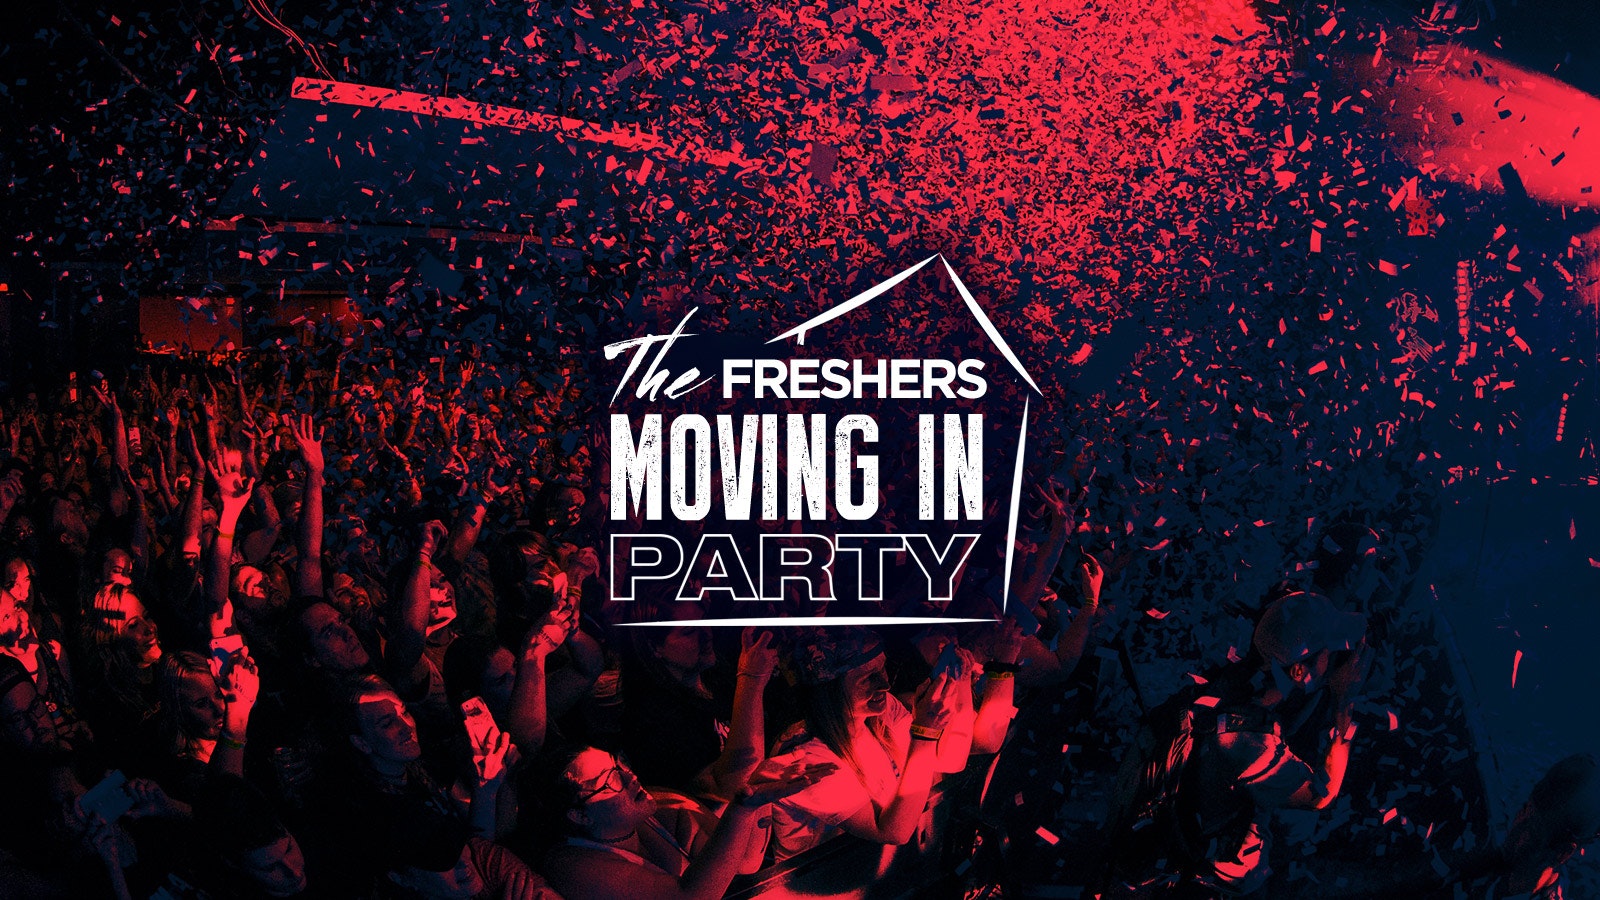 The Moving in Party // Surrey Freshers 2019 (Guildford)